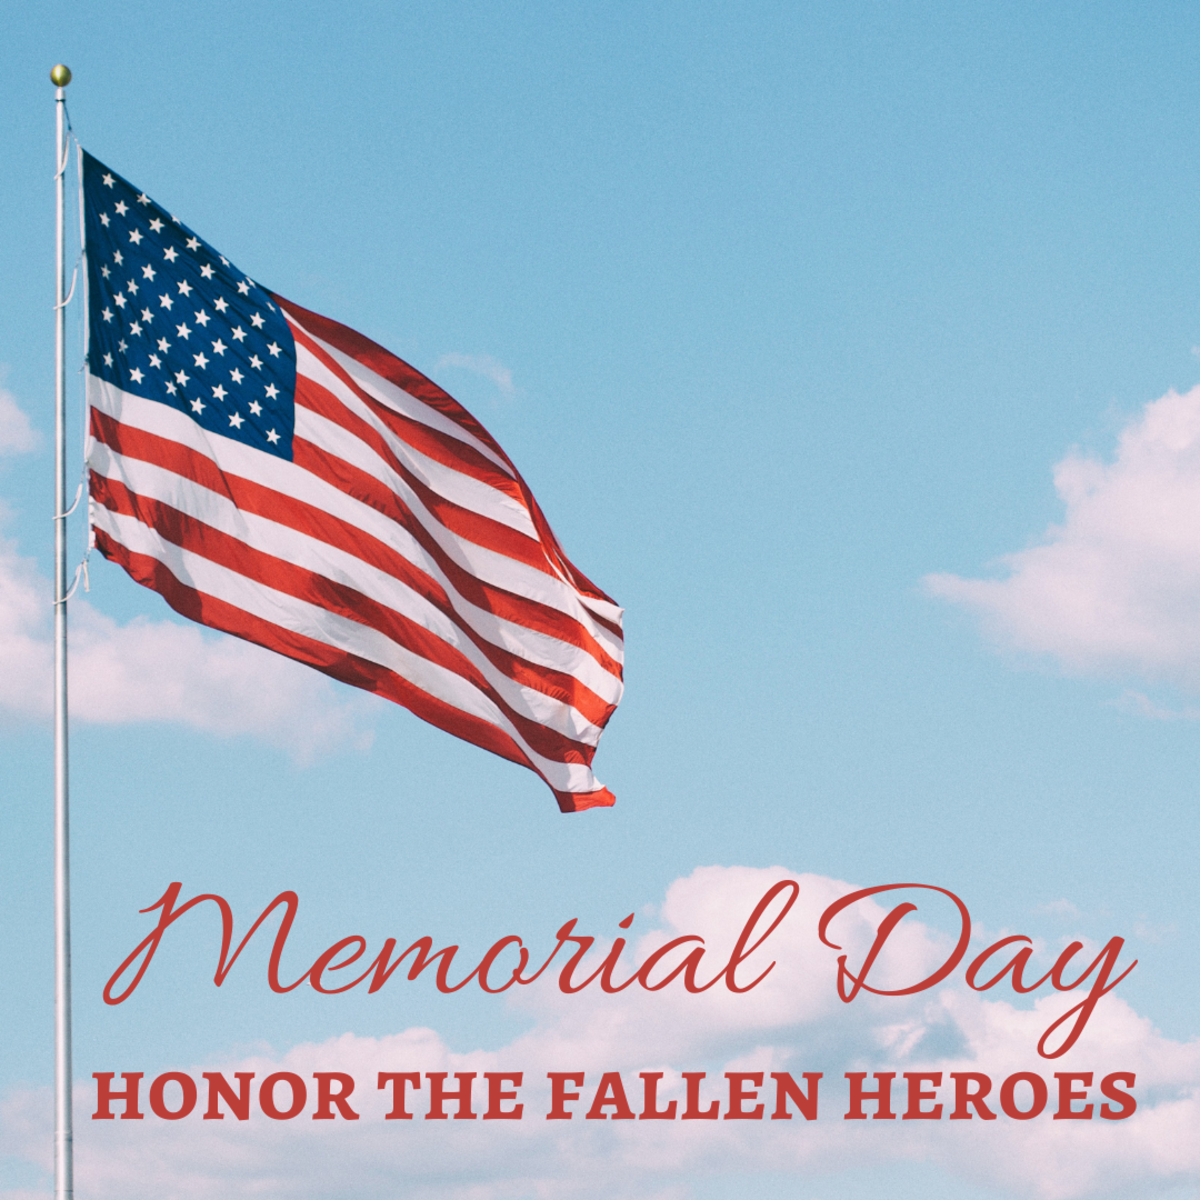 Memorial Day Meaning, Facts, and Celebration Ideas